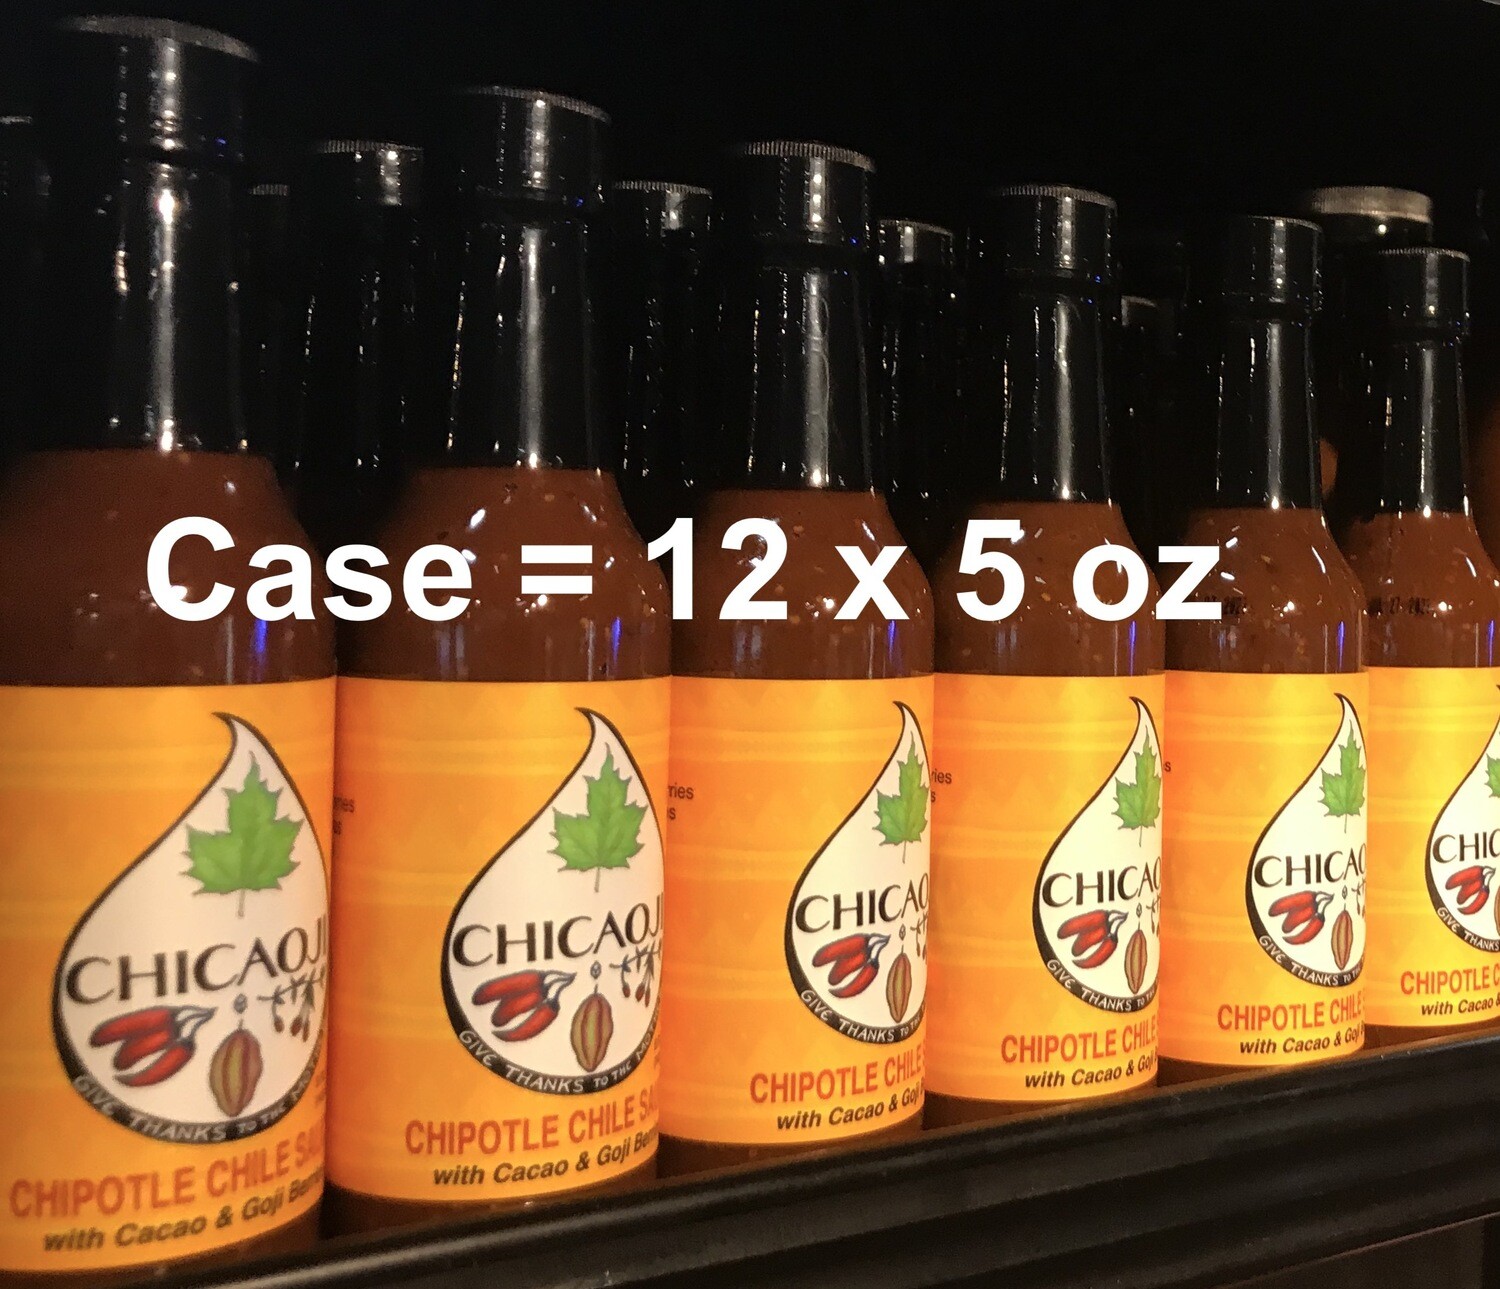 Case: 12 x 5 oz Chicaoji. Flat rate shipping $11 available.